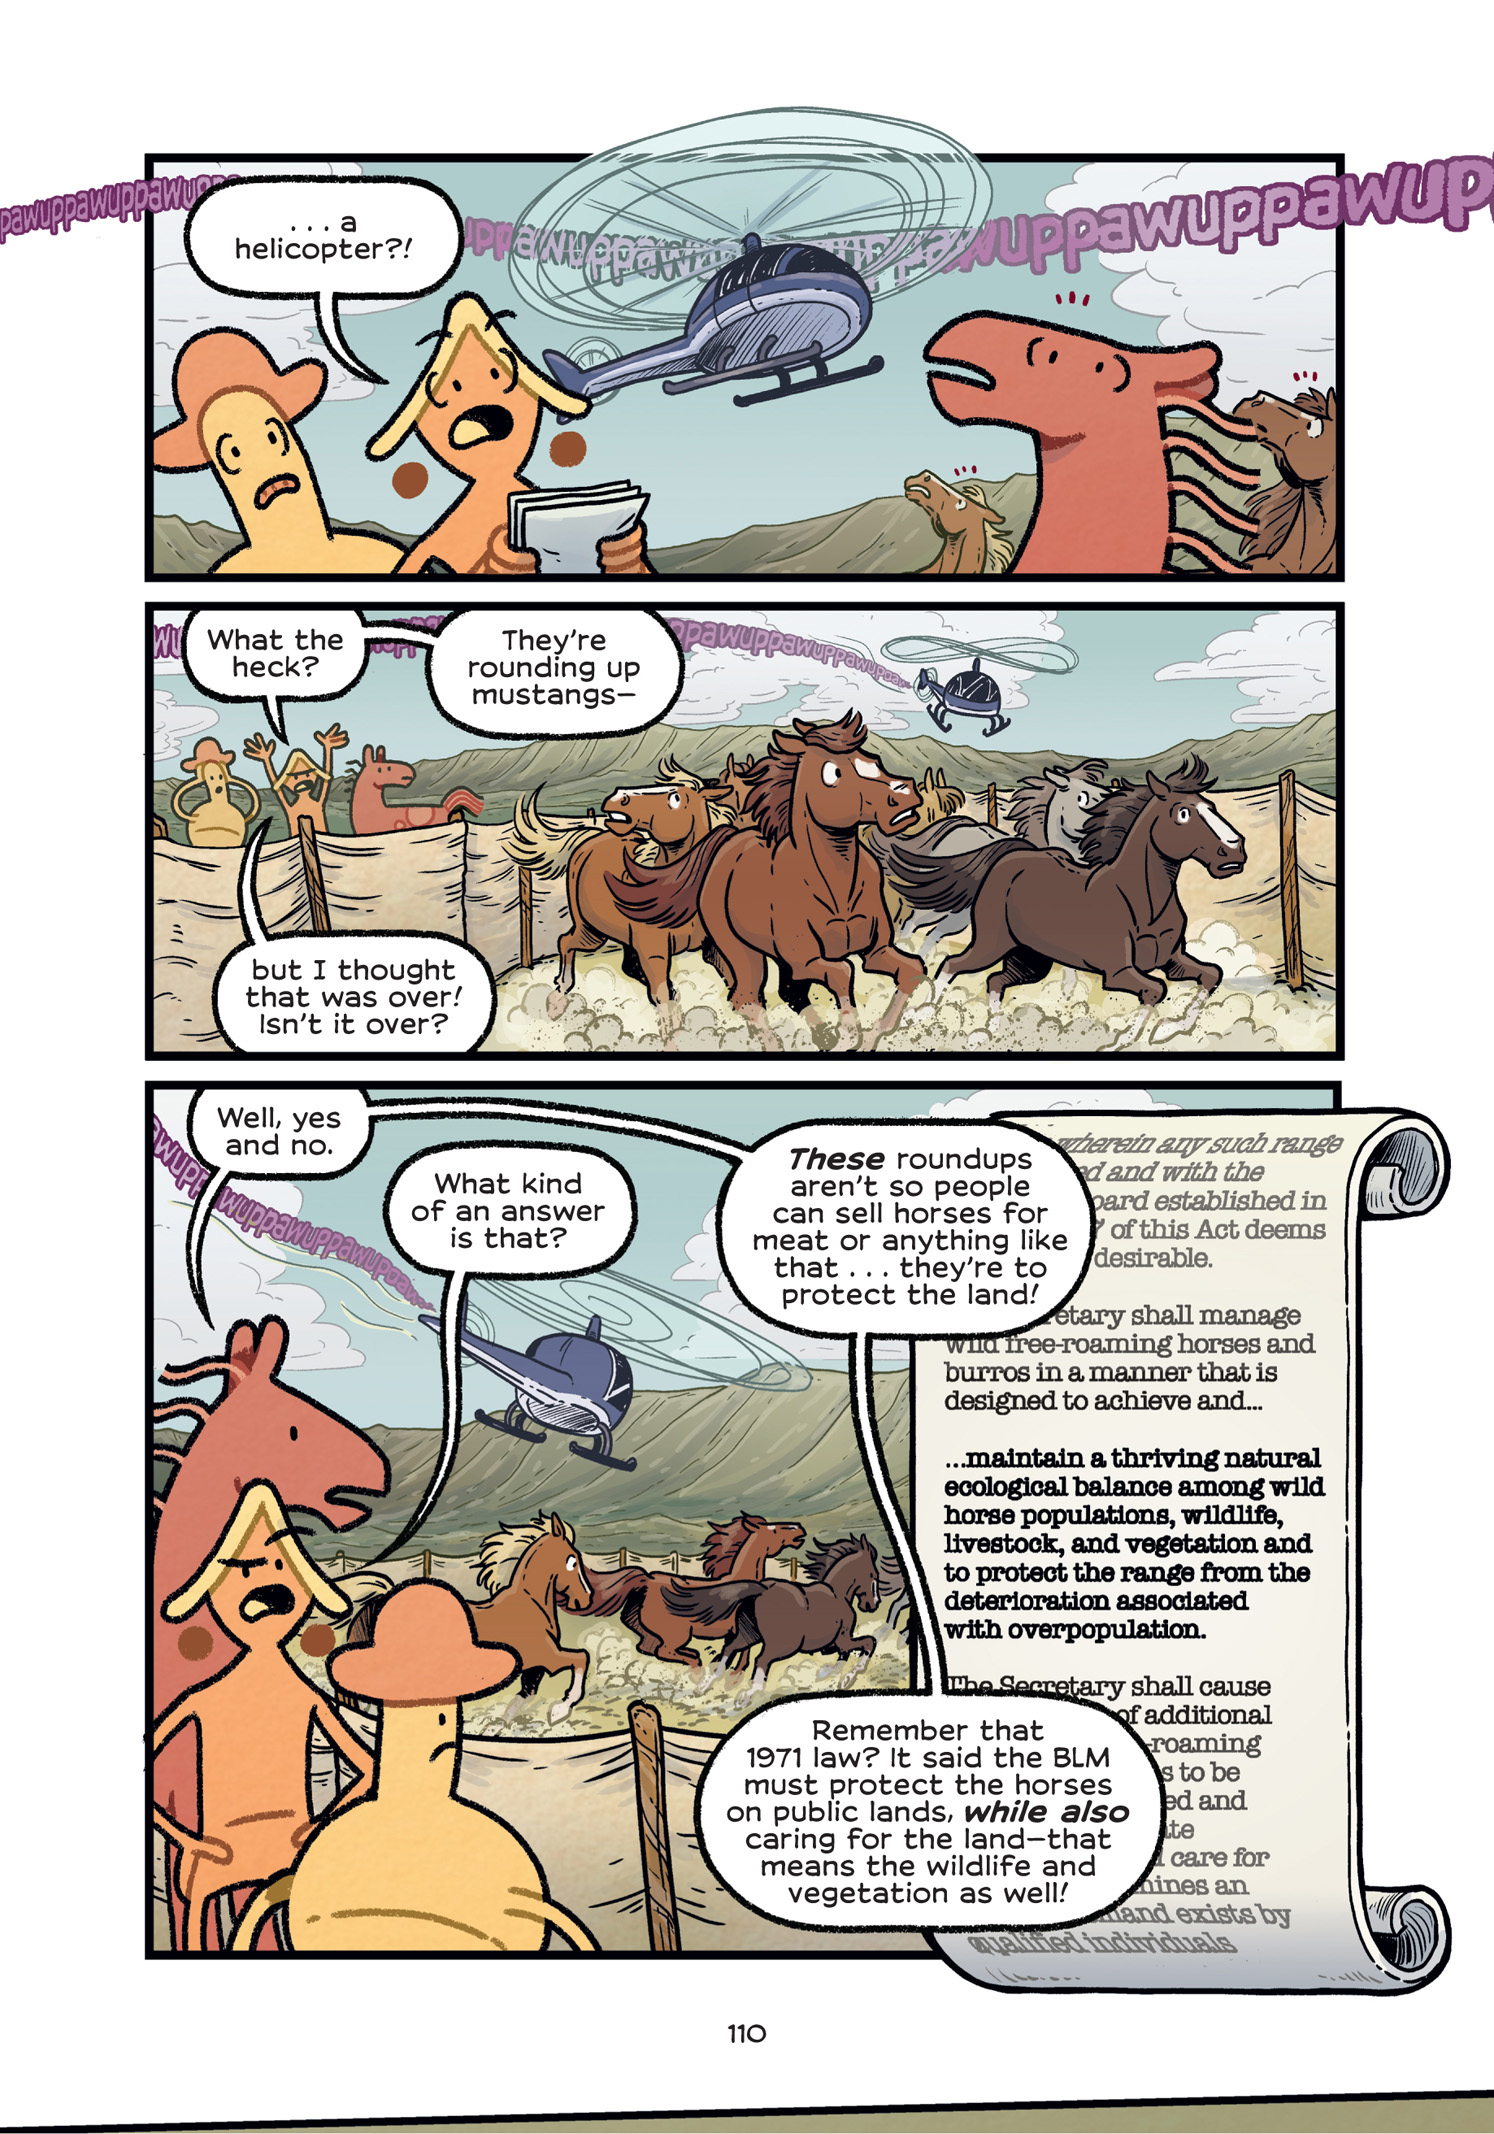 Read online History Comics comic -  Issue # The Wild Mustang - Horses of the American West - 103